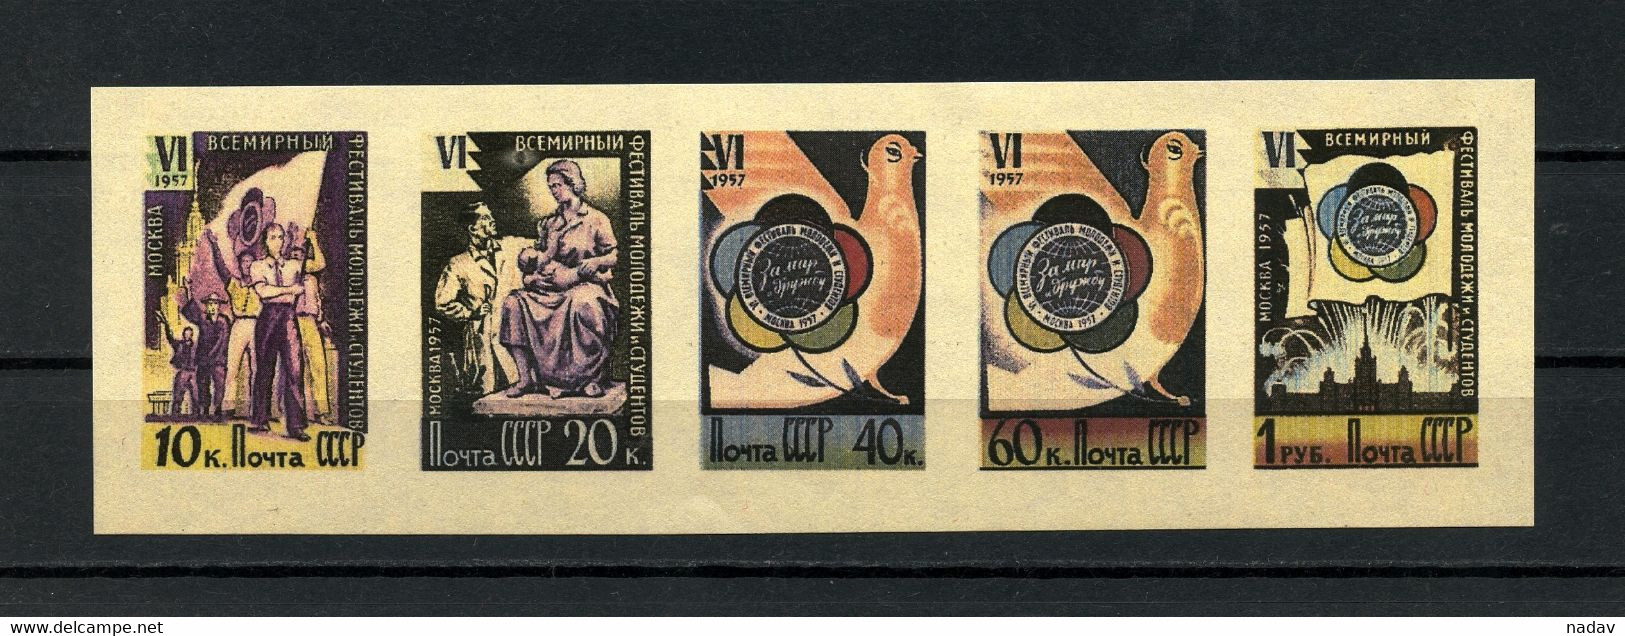 Russia & USSR-1957-  Imperforate, Reproduction - MNH** - Prove & Ristampe